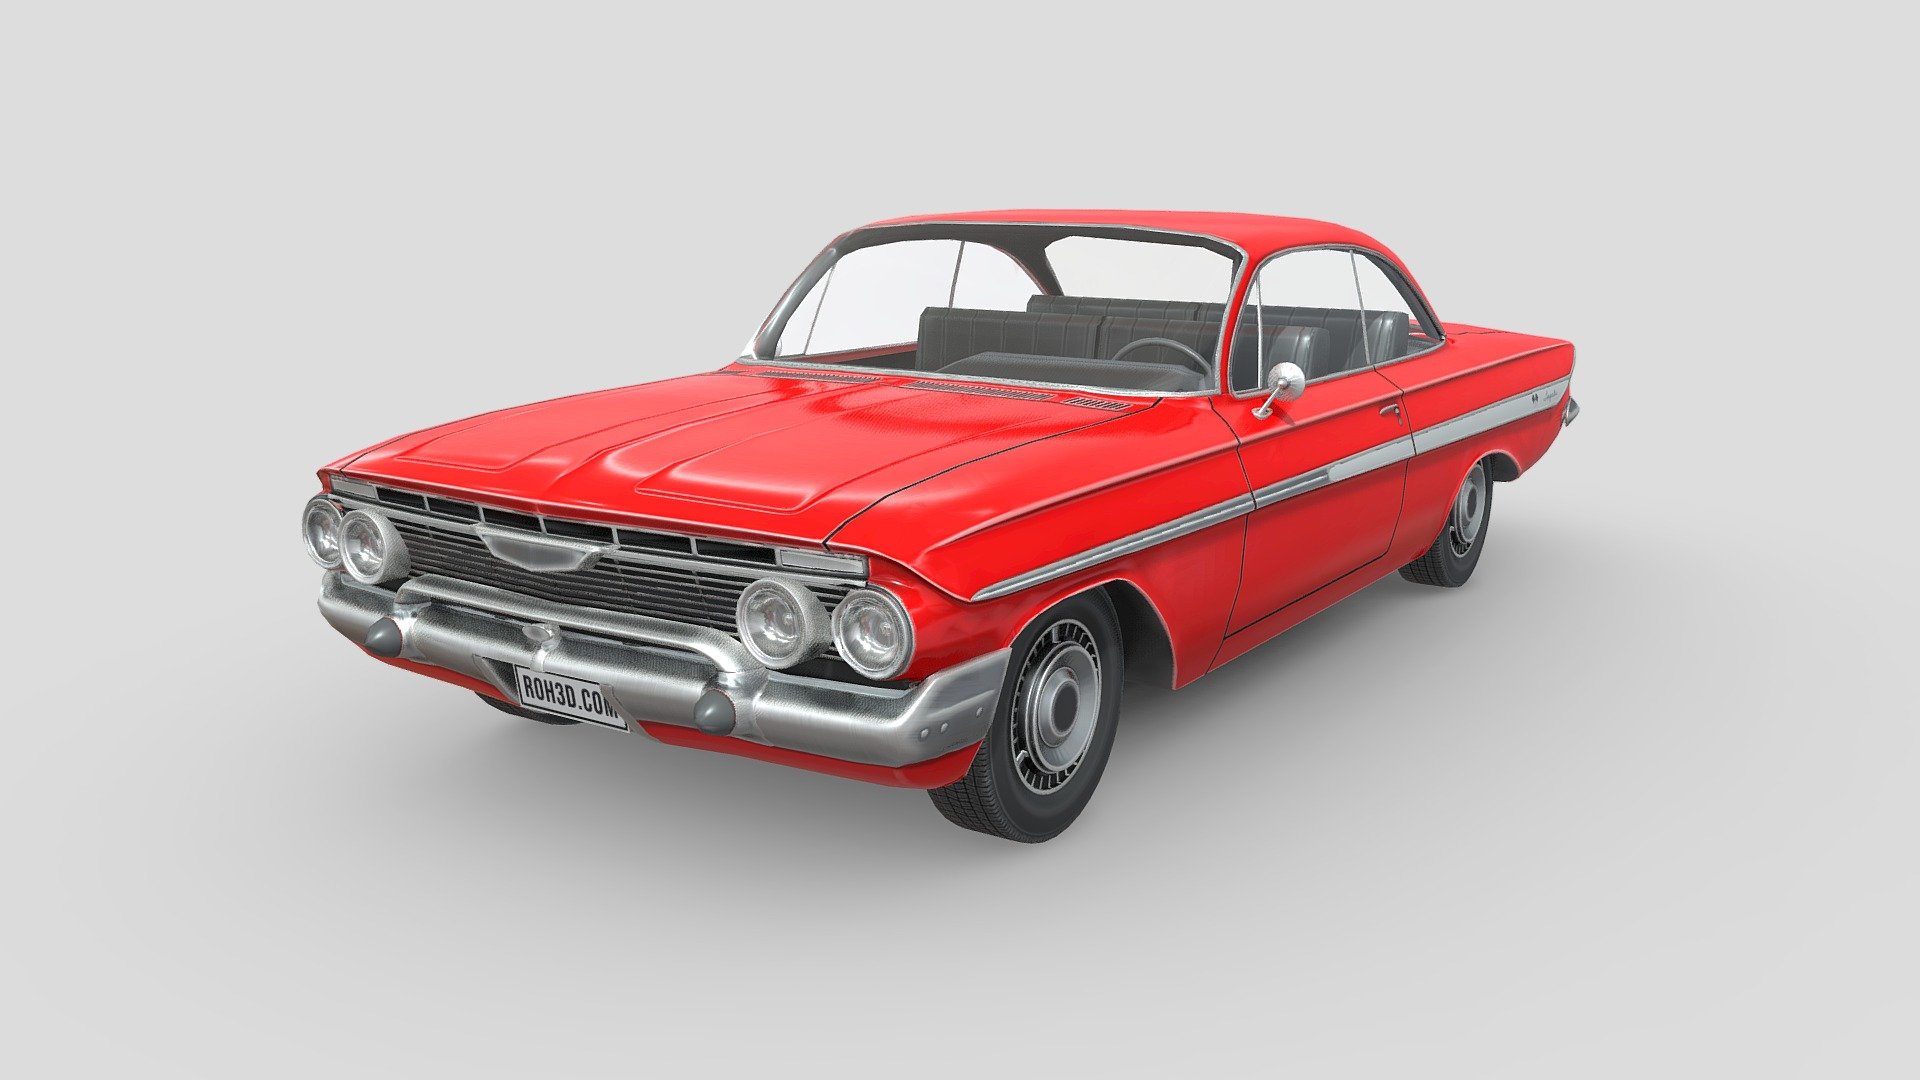 Low Poly Car - Chevrolet Impala 1961

The Chevrolet Impala is a full-sized car built by Chevrolet for model years 1958 to 1985, 1994 to 1996, and 2000 to 2020. The Impala was Chevrolet's popular flagship passenger car and was among the better-selling American-made automobiles in the United States.

For its debut in 1958, the Impala was distinguished from other models by its symmetrical triple taillights. The Chevrolet Caprice was introduced as a top-line Impala Sport Sedan for model year 1965, later becoming a separate series positioned above the Impala in 1966, which, in turn, remained above the Chevrolet Bel Air and the Chevrolet Biscayne. The Impala continued as Chevrolet's most popular full-sized model through the mid-1980s. Between 1994 and 1996, the Impala was revised as a 5.7-liter V8–powered version of the Chevrolet Caprice Classic sedan 3d model